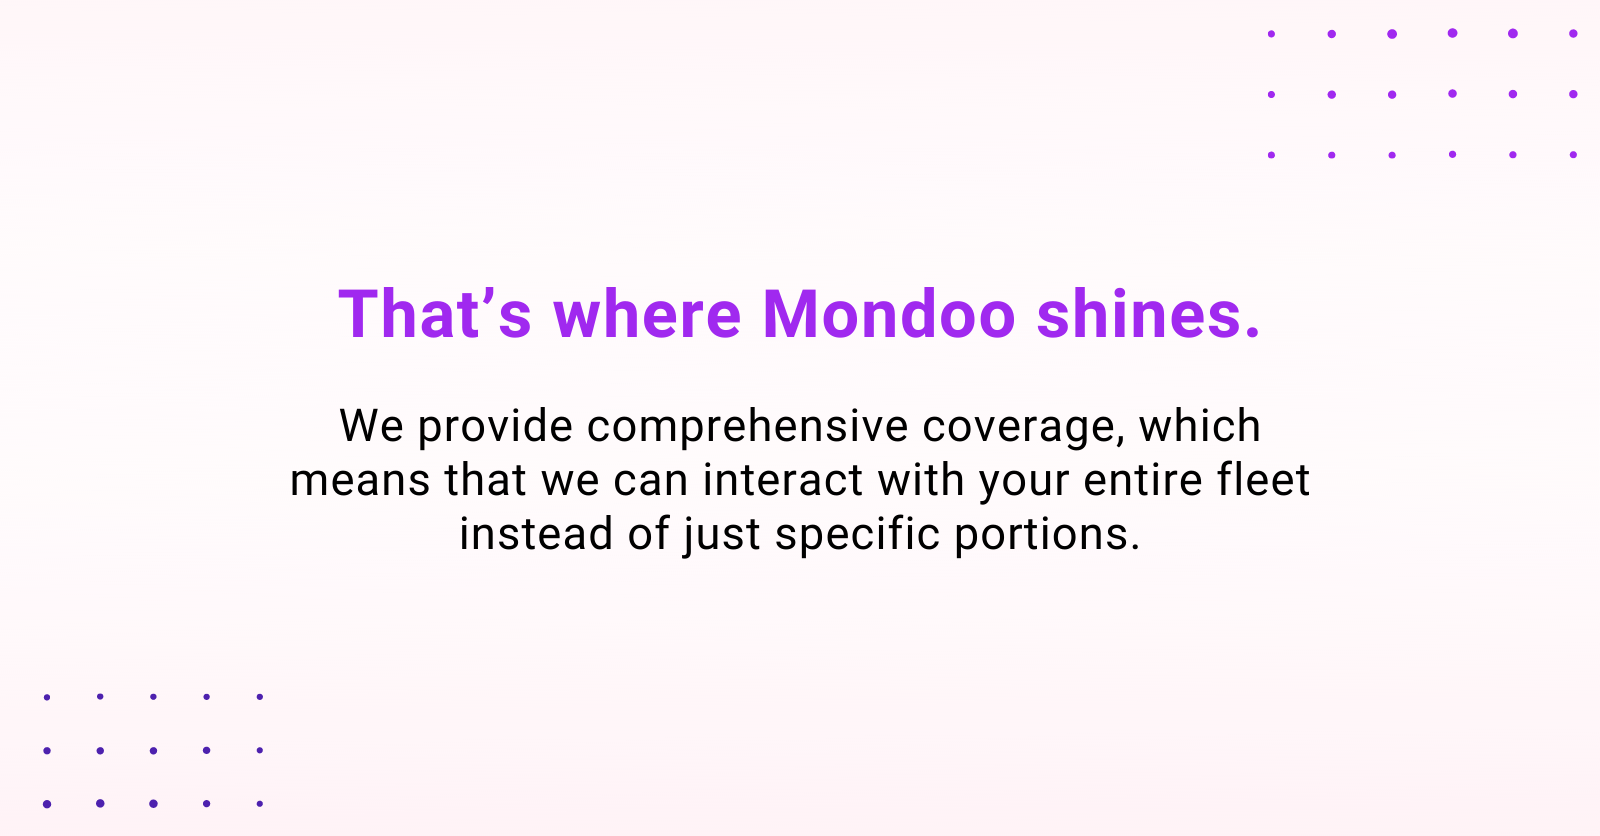 A graphic that states: That's where Mondoo shines. We provide comprehensive coverage, which means that we can interact with your entire fleet instead of just specific portions